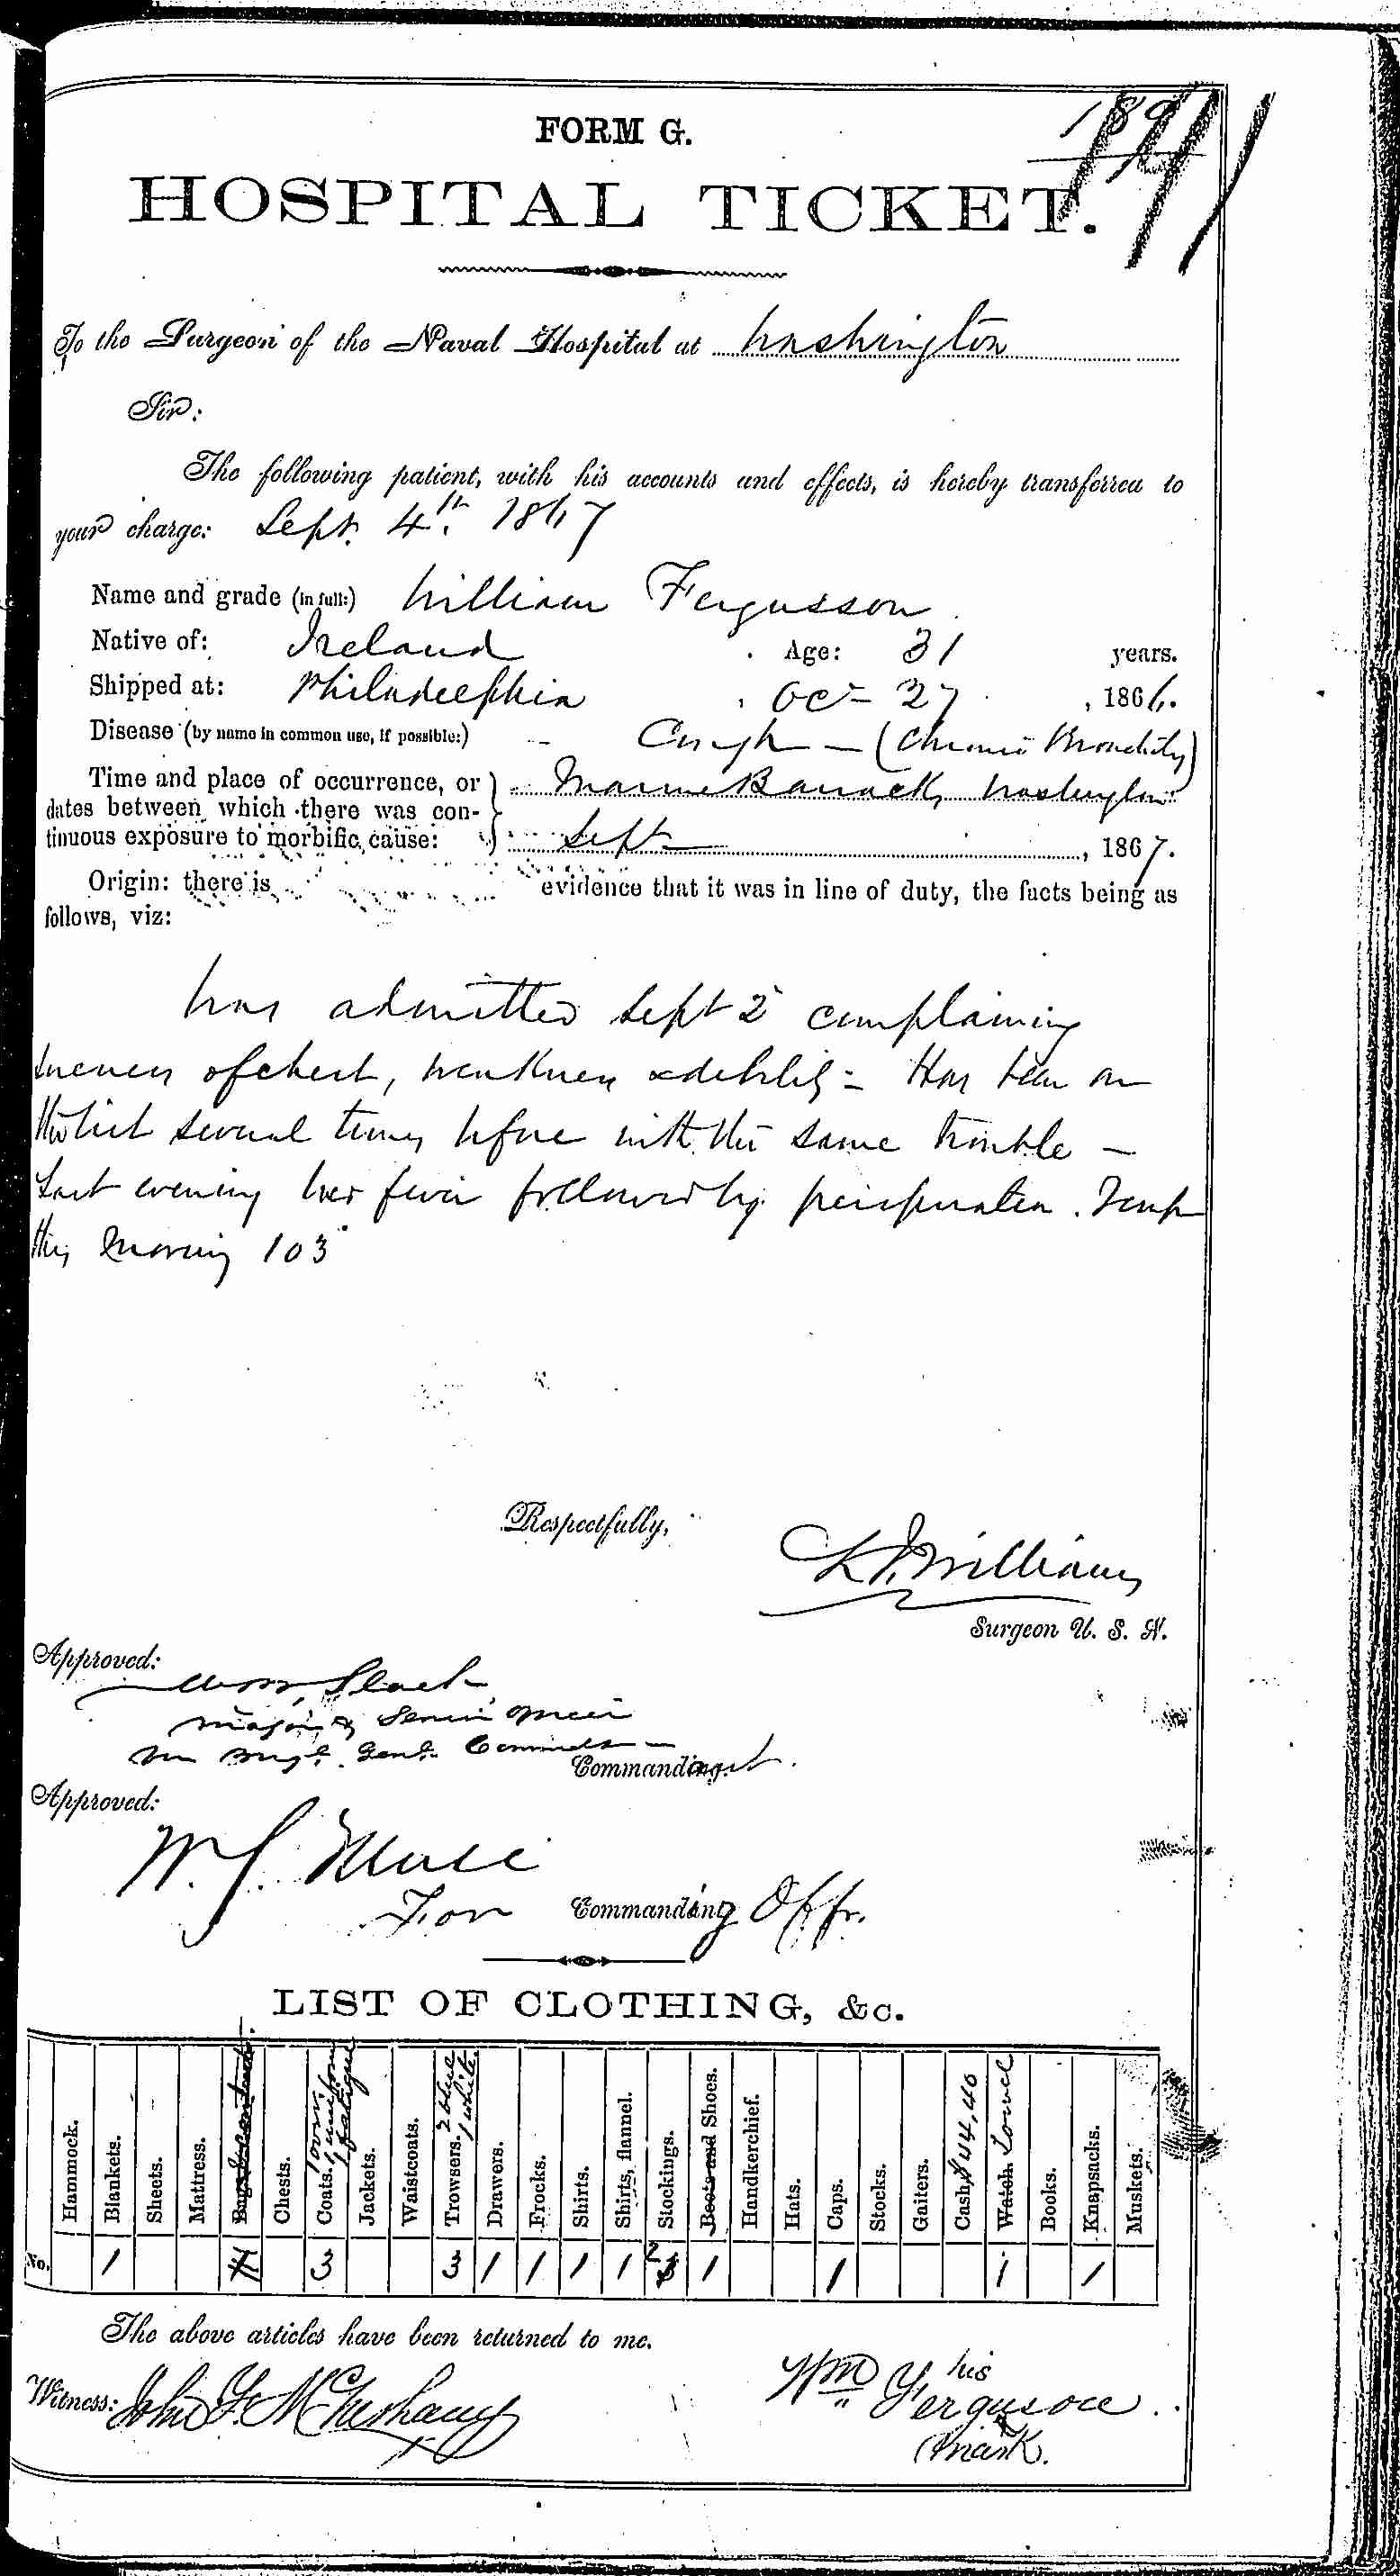 Entry for William Ferguson (page 1 of 2) in the log Hospital Tickets and Case Papers - Naval Hospital - Washington, D.C. - 1866-68